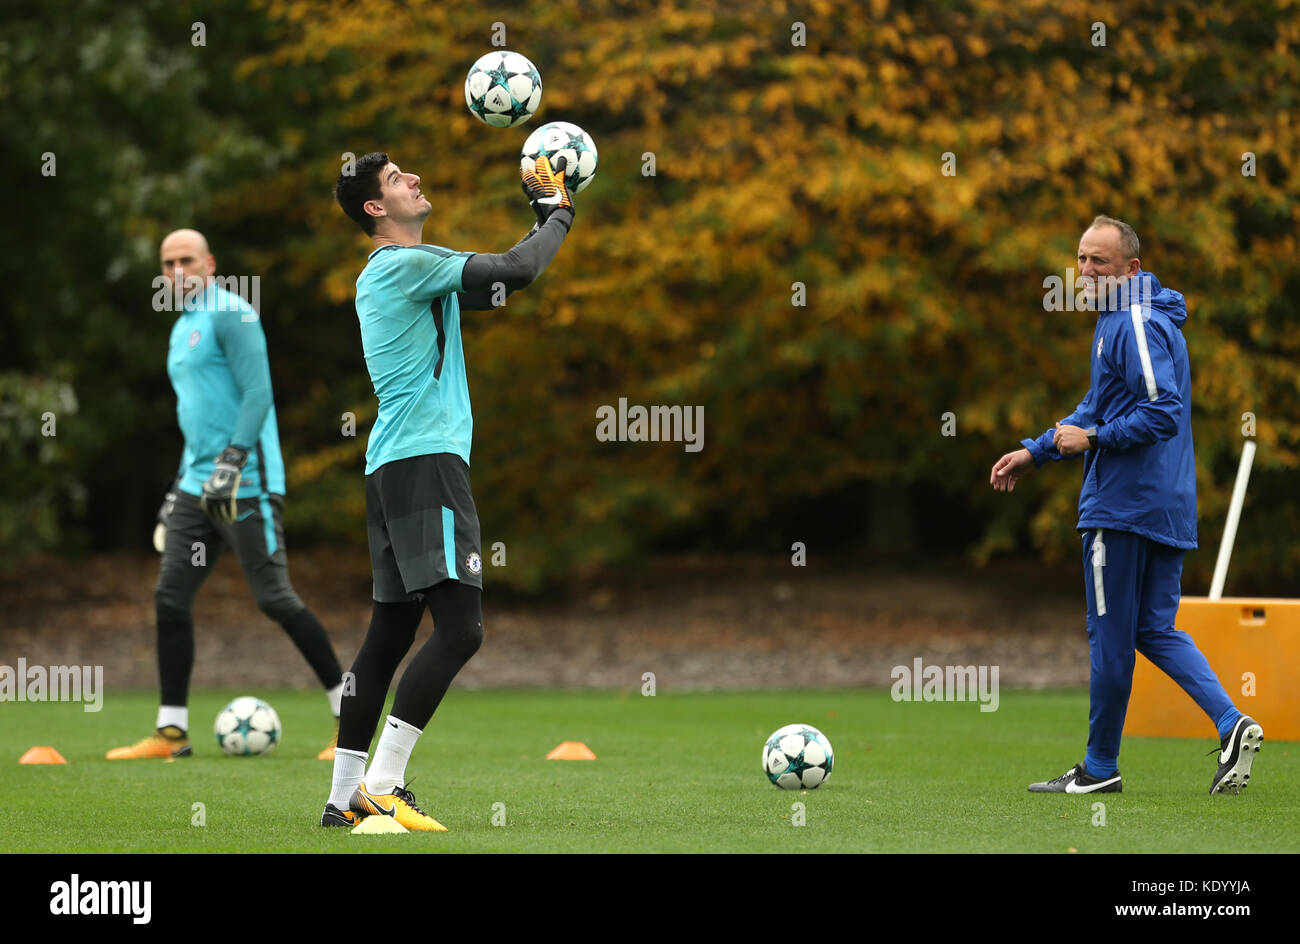 Chelsea goalkeeper Thibaut Courtois during a training session at Chelsea FC Training Ground, Stoke D'Abernon. Stock Photo